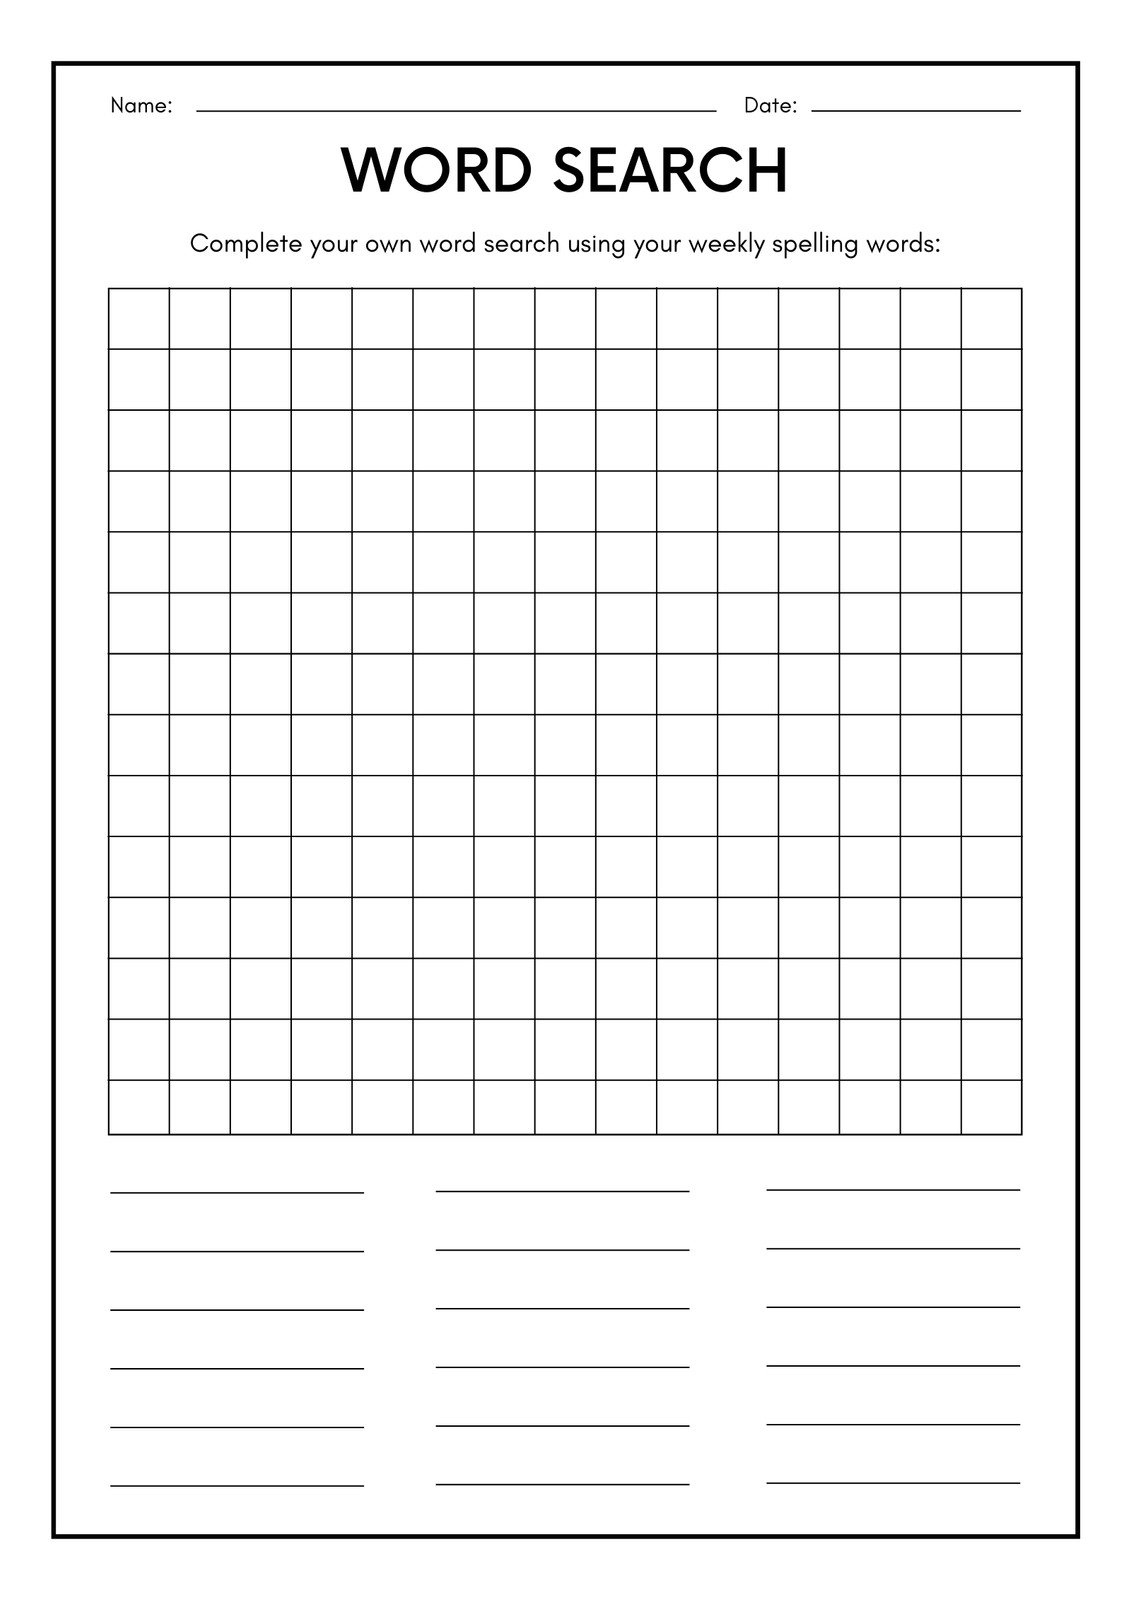 Free Printable Word Search Worksheet Templates | Canva intended for Free Printable Make Your Own Word Search